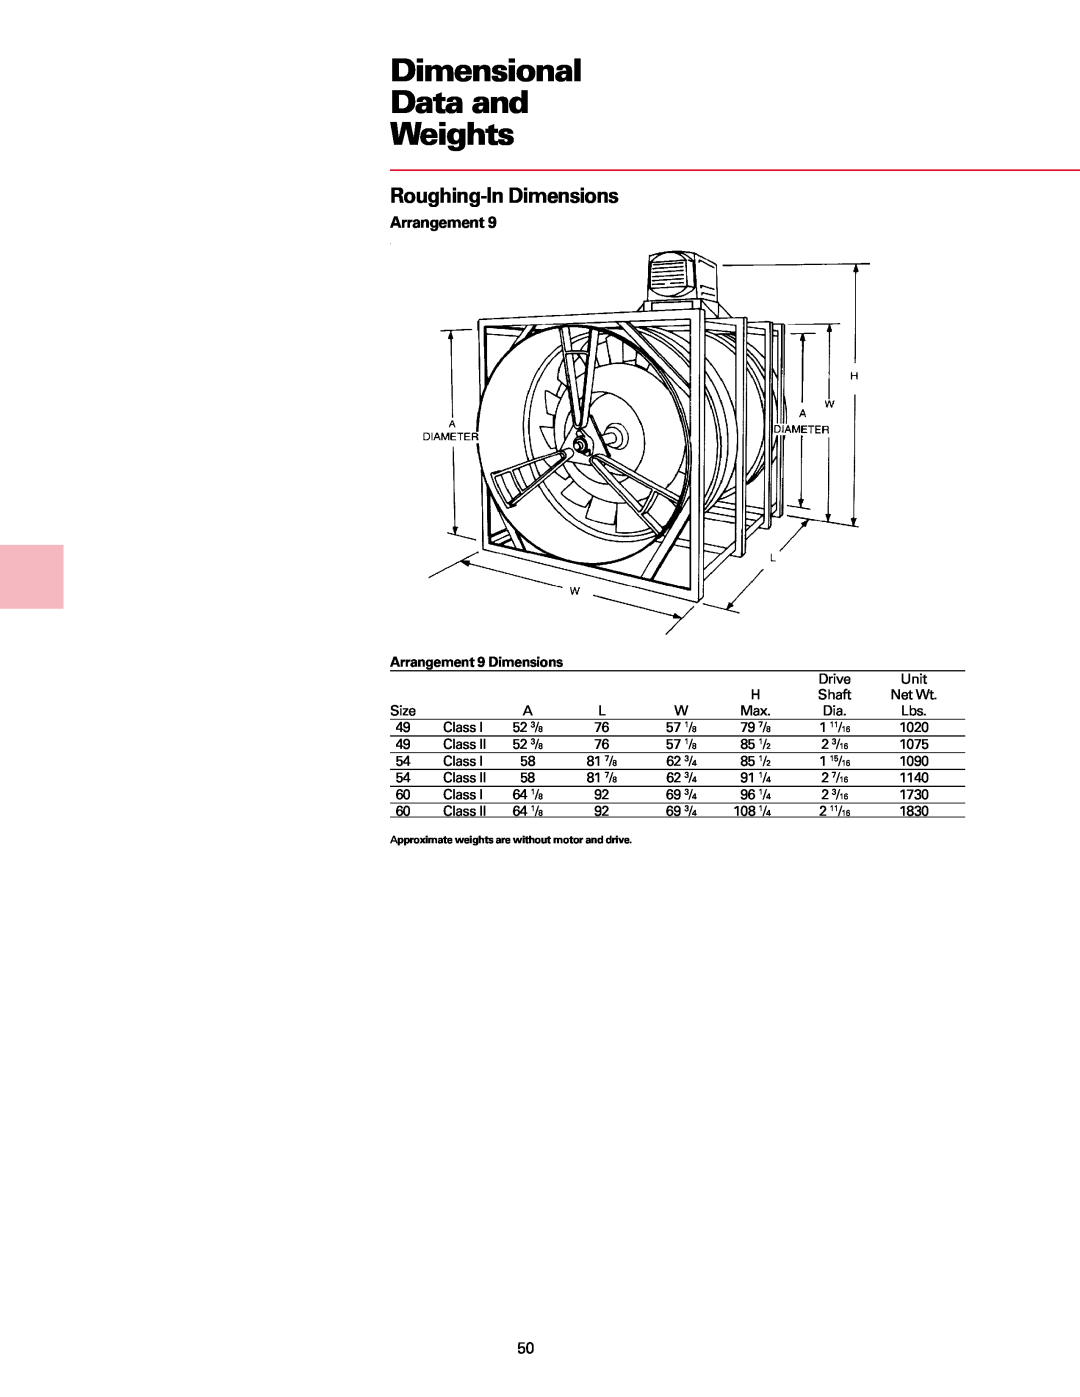 Trane Fan manual Dimensional Data and Weights, Roughing-InDimensions, Arrangement, Drive 